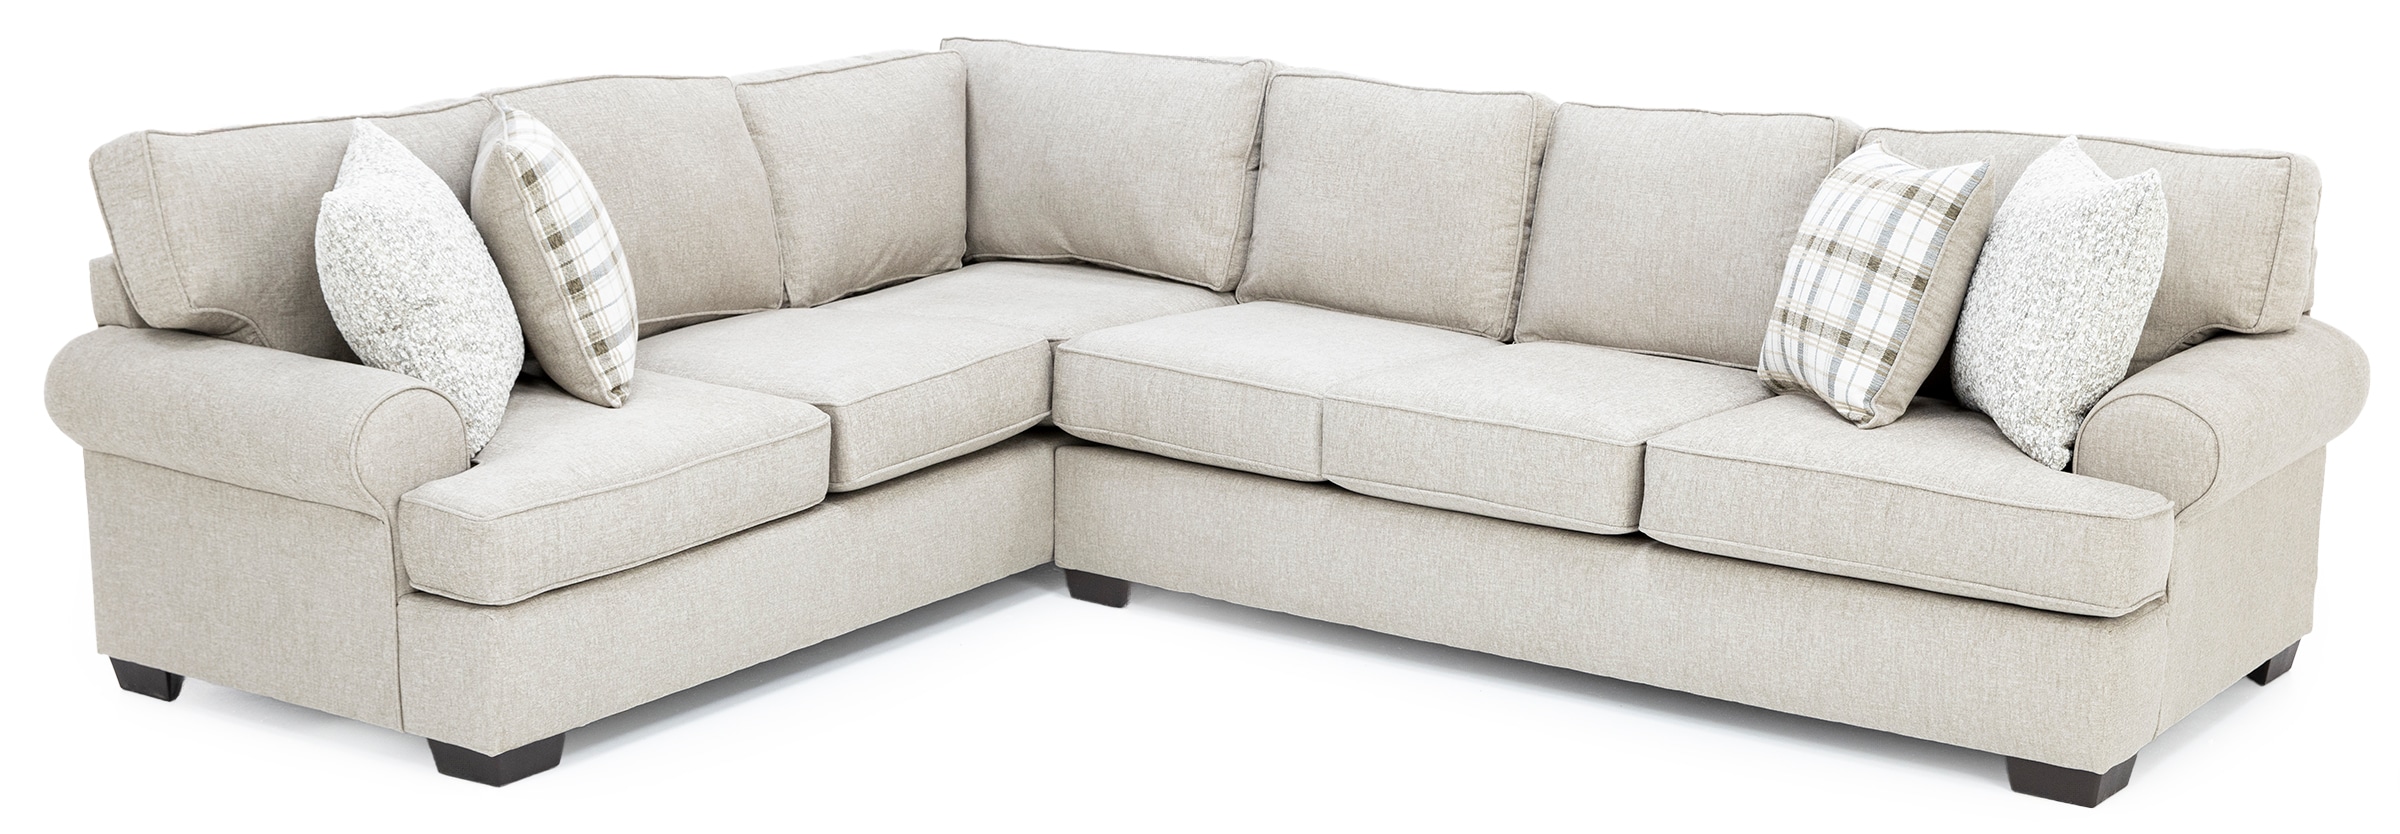 Quaker 2-Pc. Sectional in Oatmeal